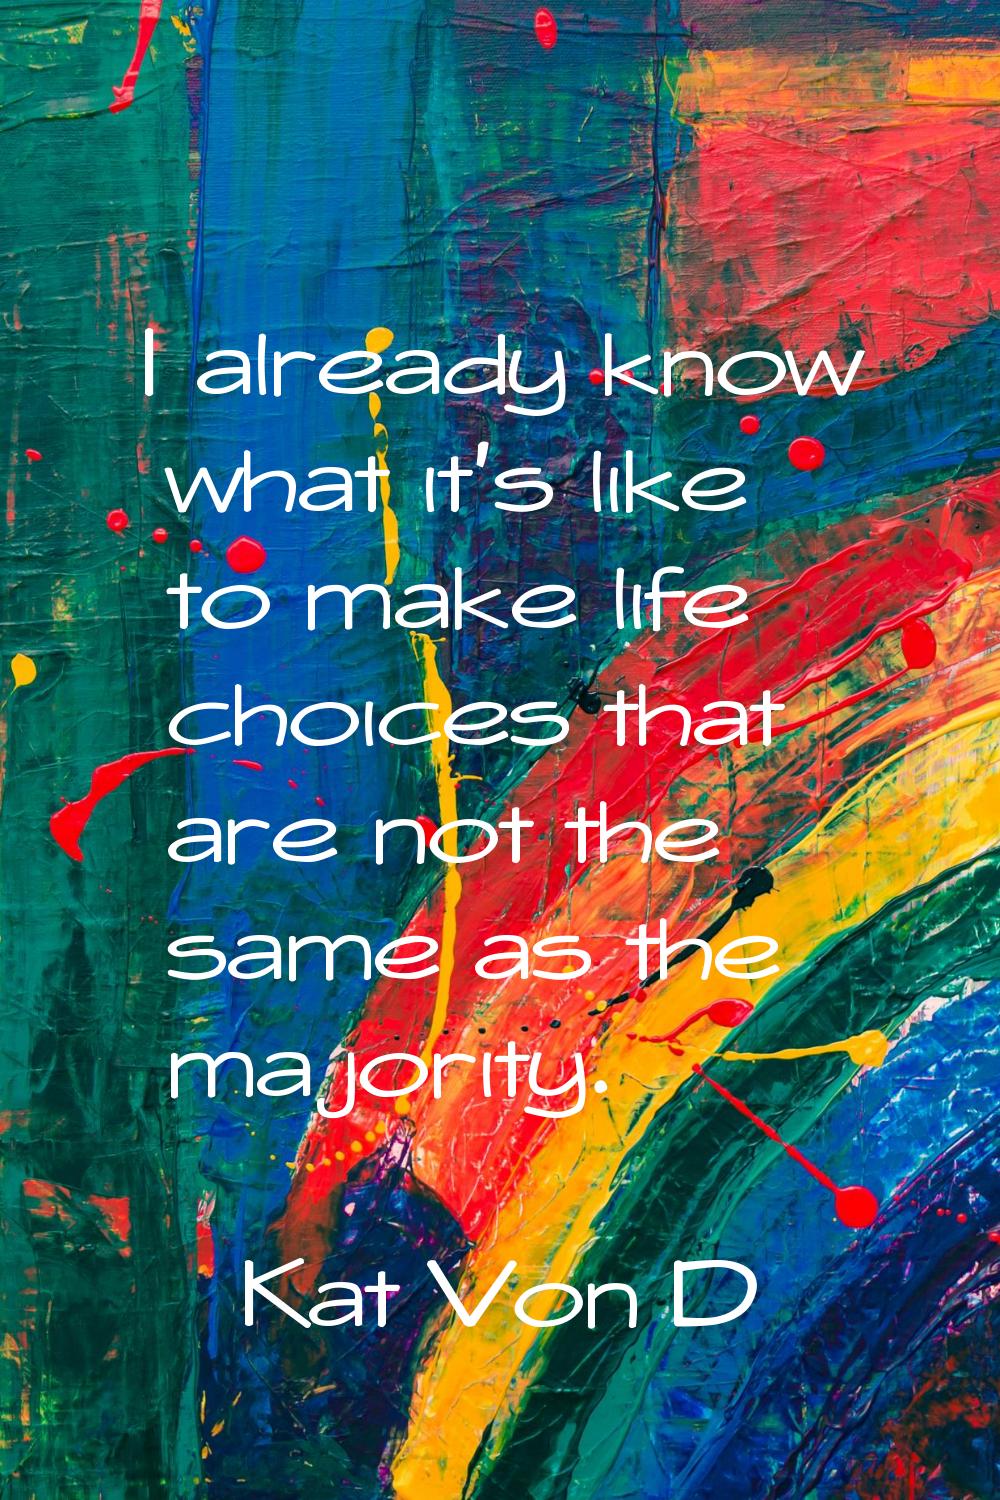 I already know what it's like to make life choices that are not the same as the majority.